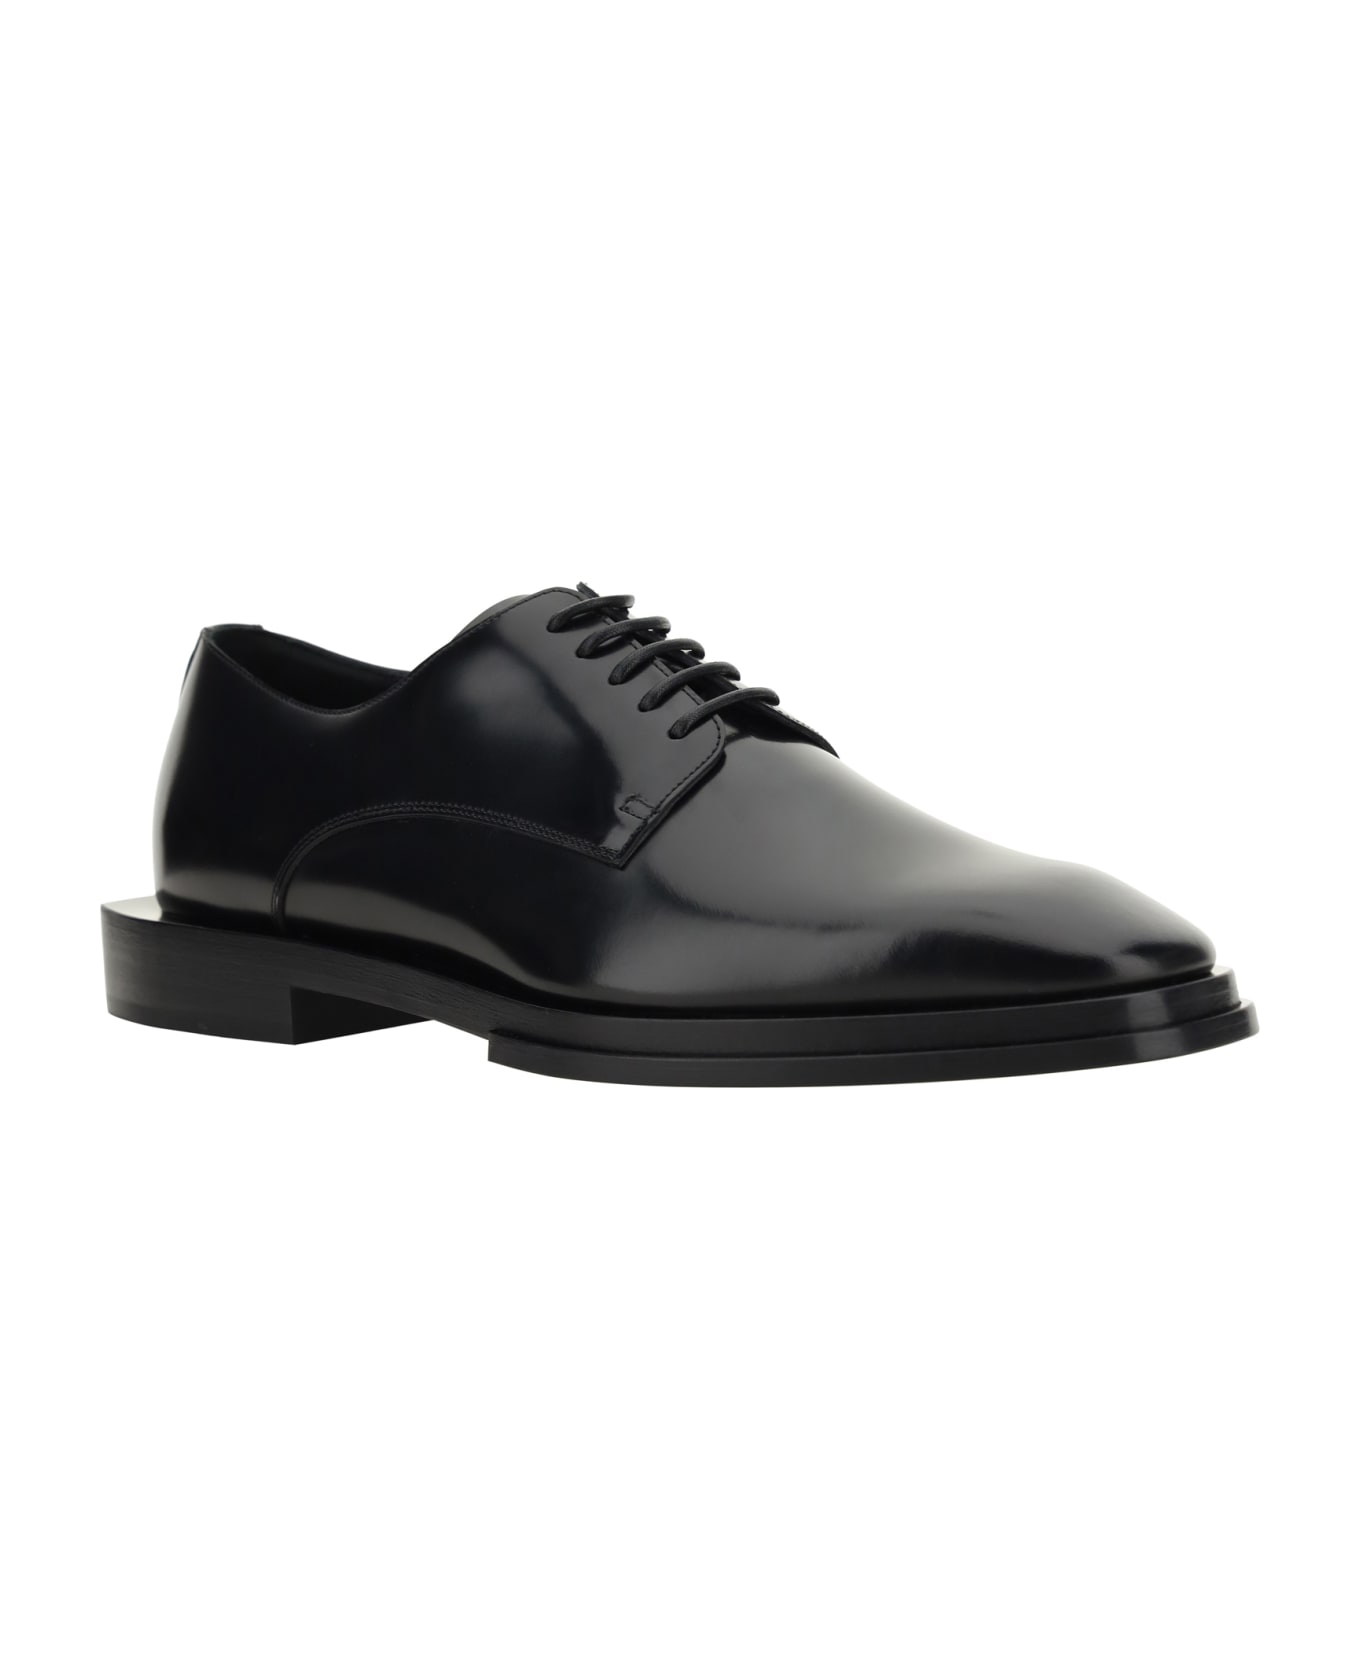 Alexander McQueen Lace Up Shoes - Black/silver